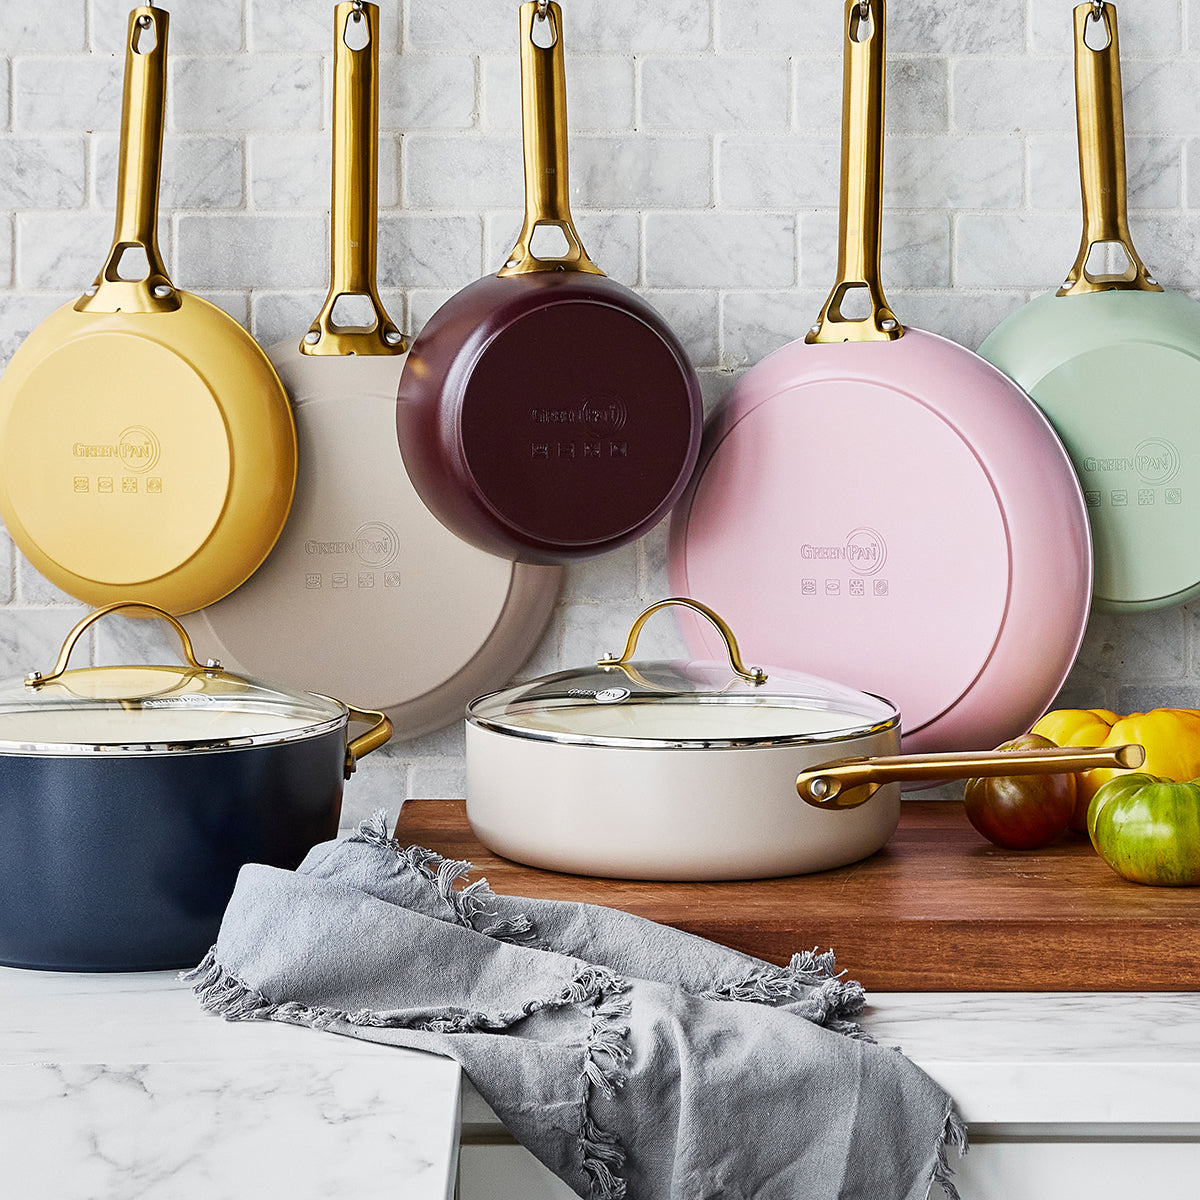 GreenPan cookware sale: Save up to 65% on pots and pans at this